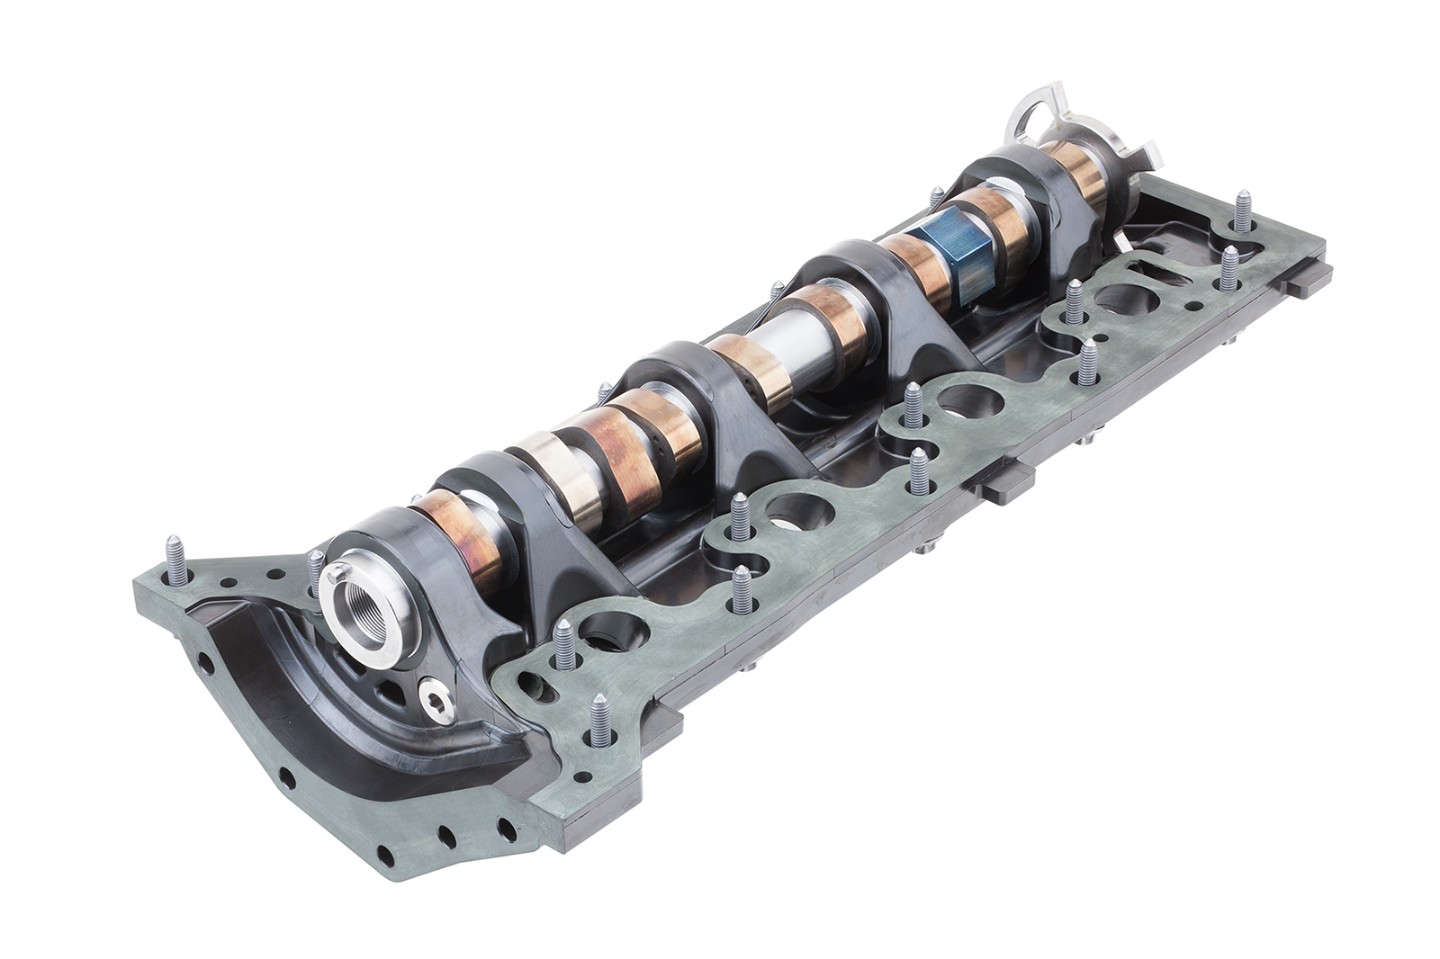 The camshaft module features a monolithic design with integrated bearings.